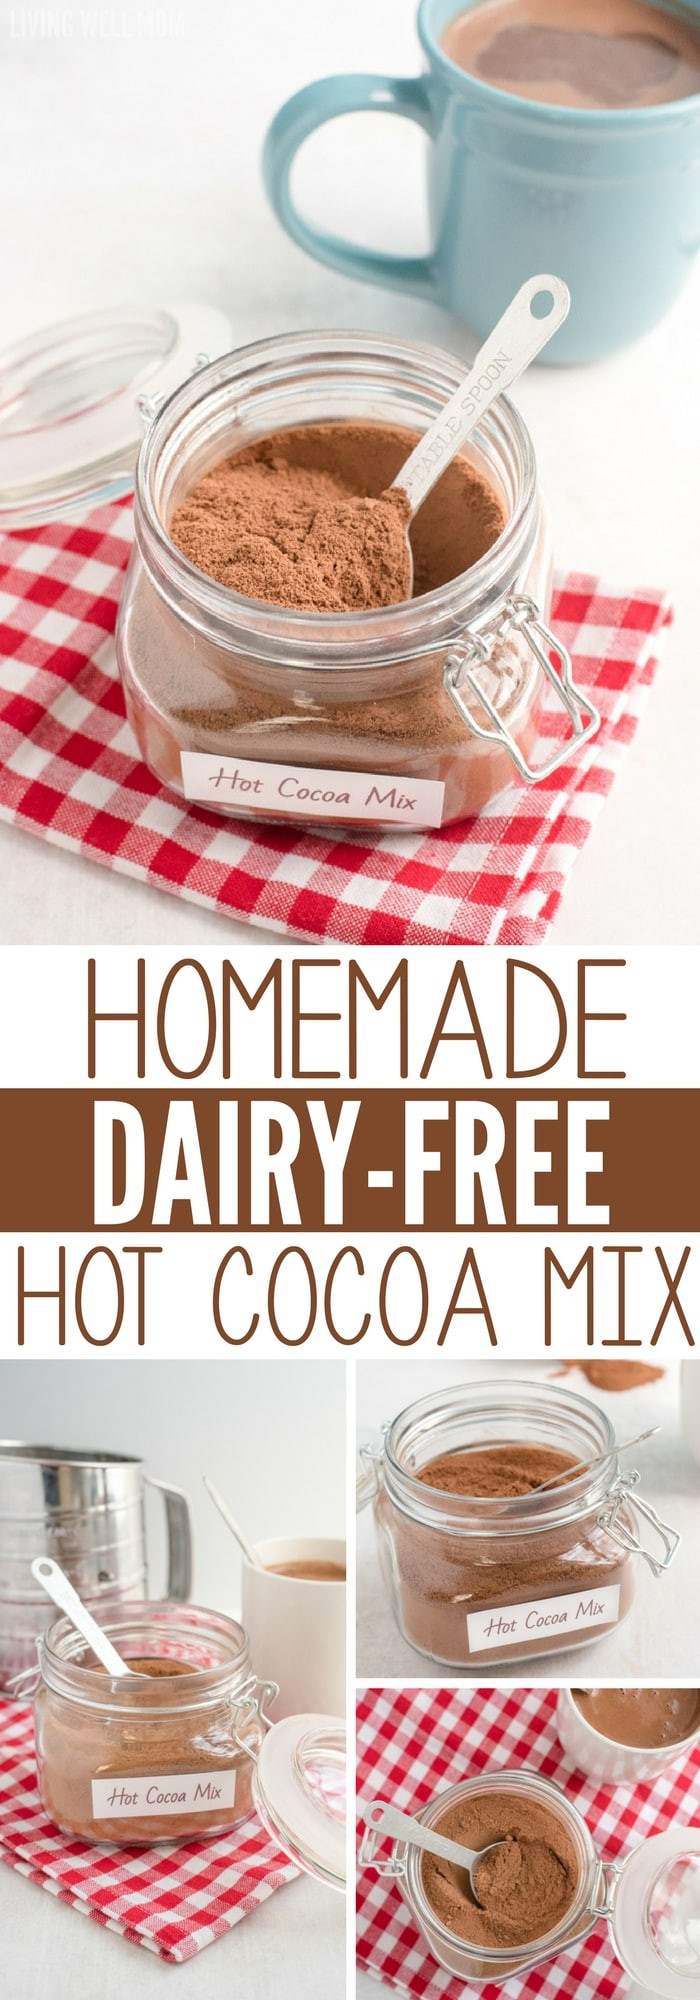 Is Hershey'S Cocoa Powder Dairy Free
 Homemade Hot Cocoa Mix for Kids Dairy Free